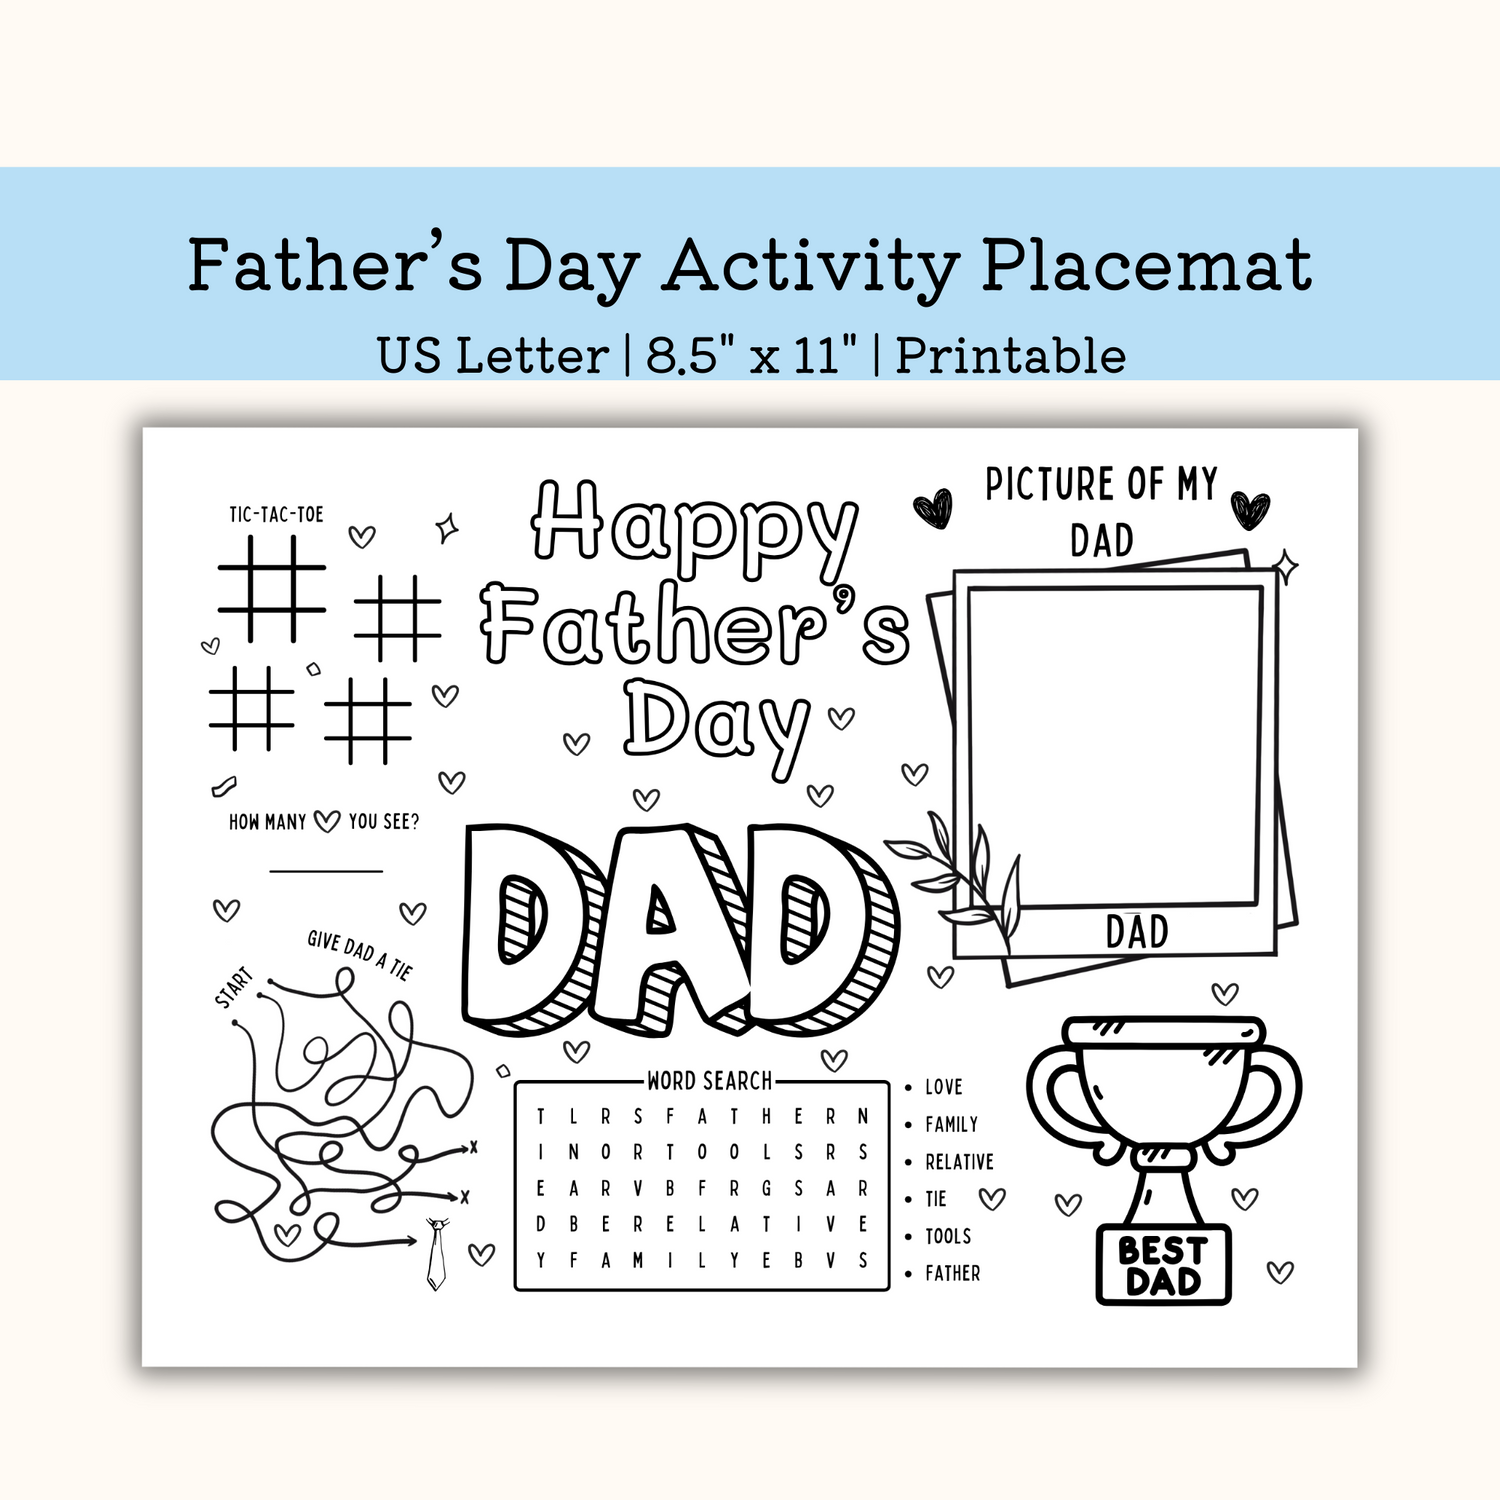 Printable Fathers Day activity placemat